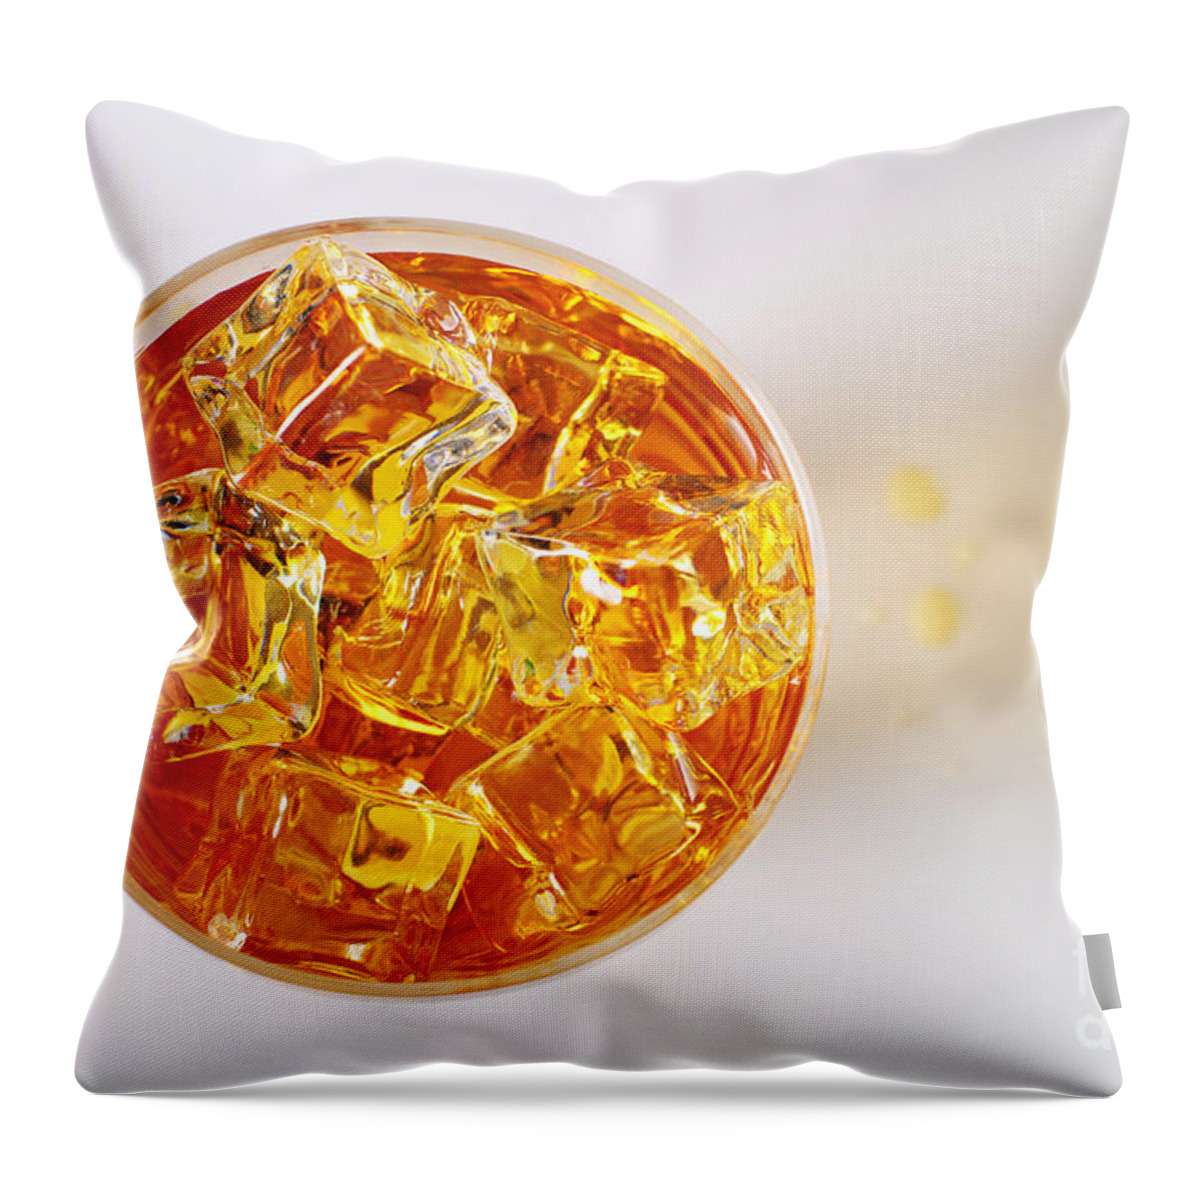 Alcohol Throw Pillow featuring the photograph Top view on Drink by Carlos Caetano